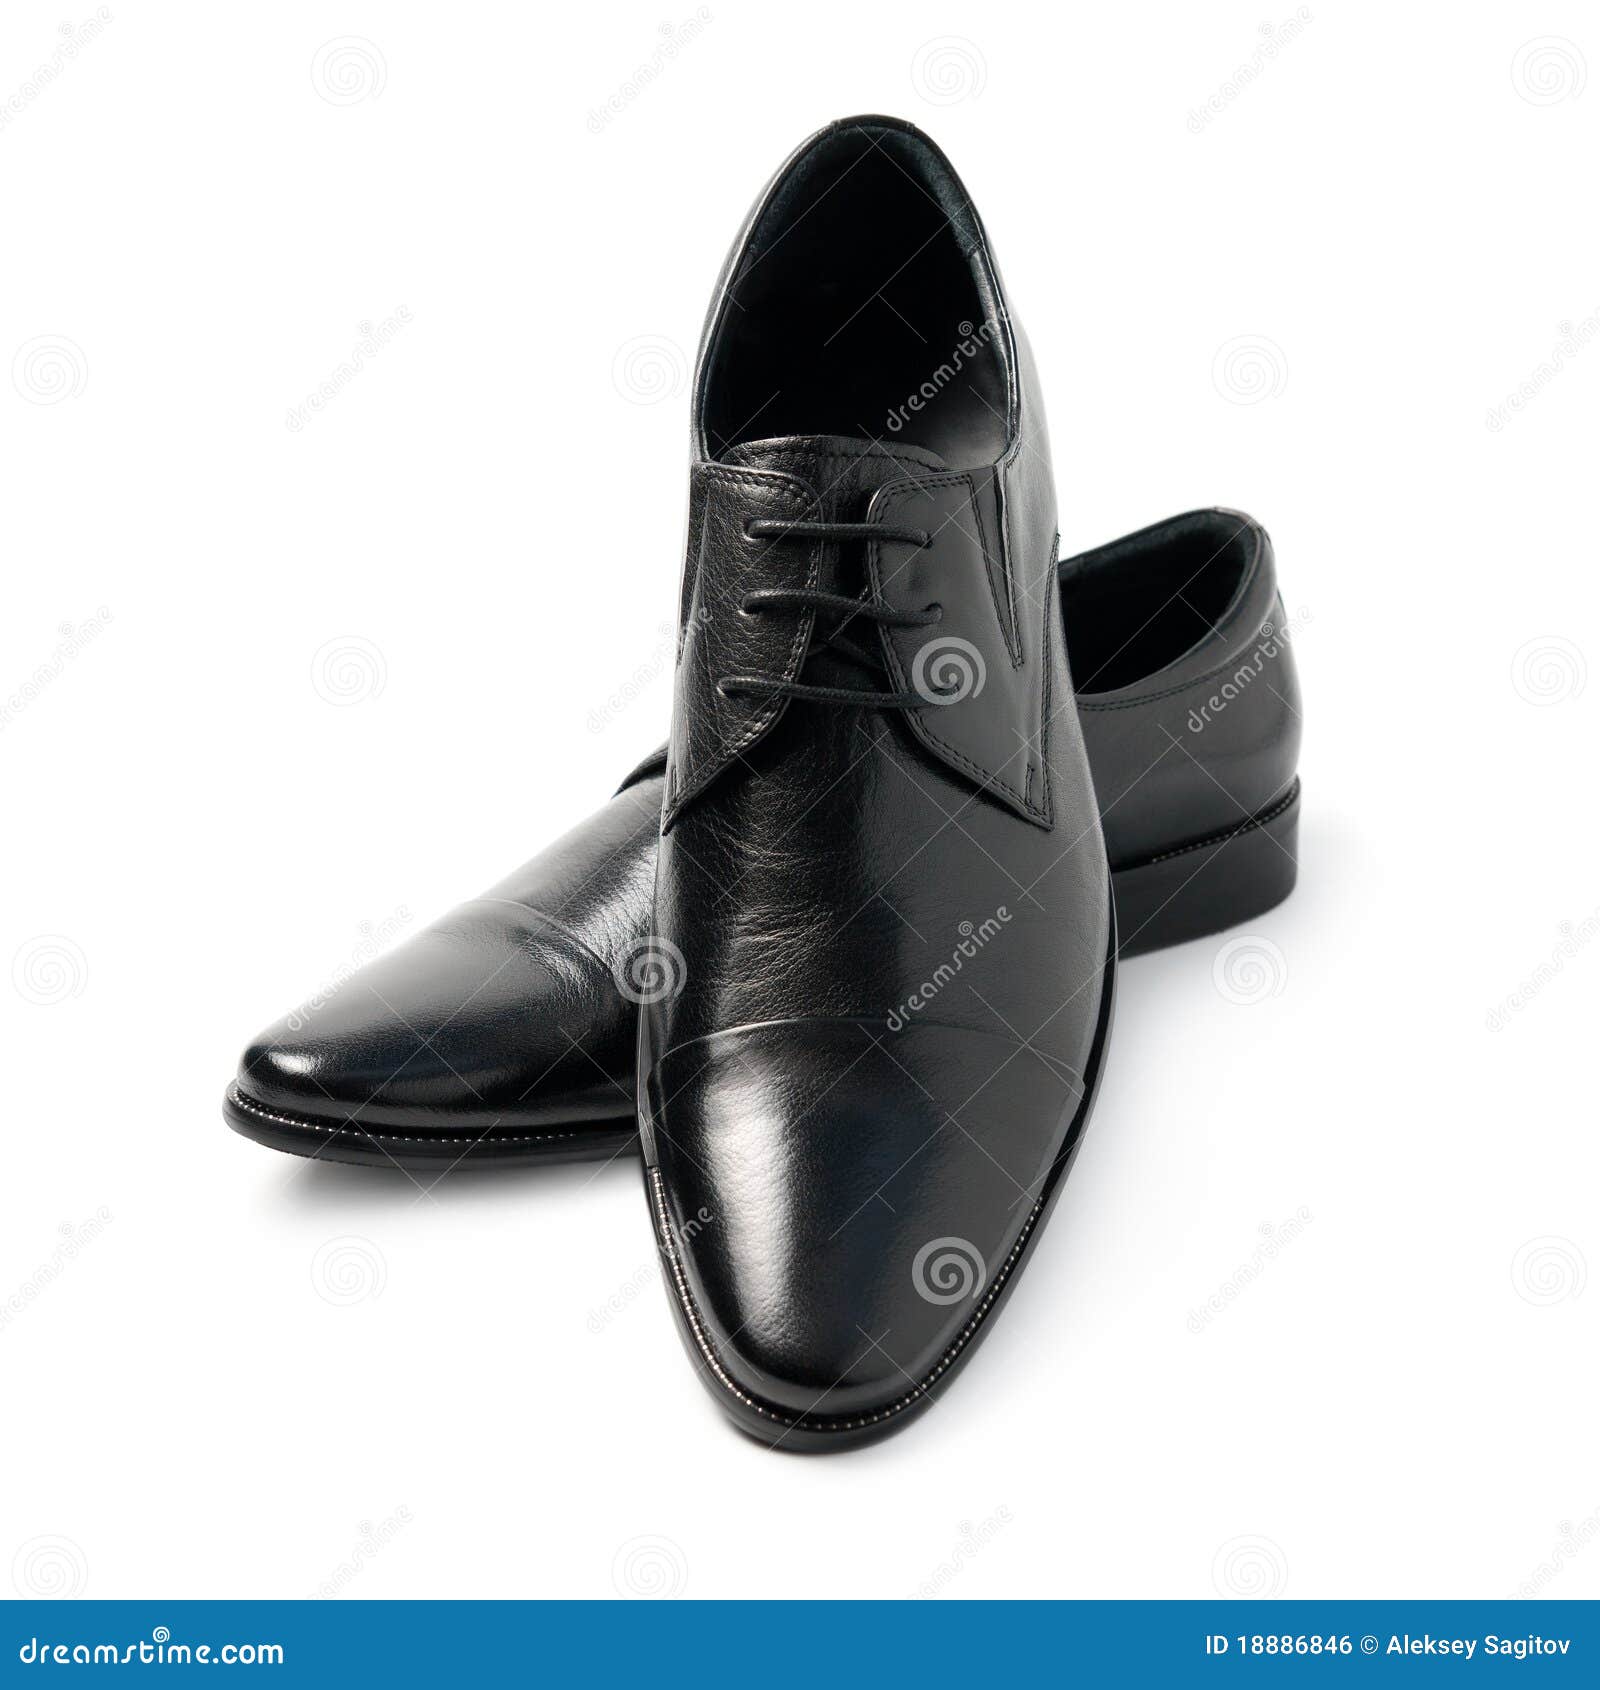 The black man s shoes stock photo. Image of heels, footwear - 18886846